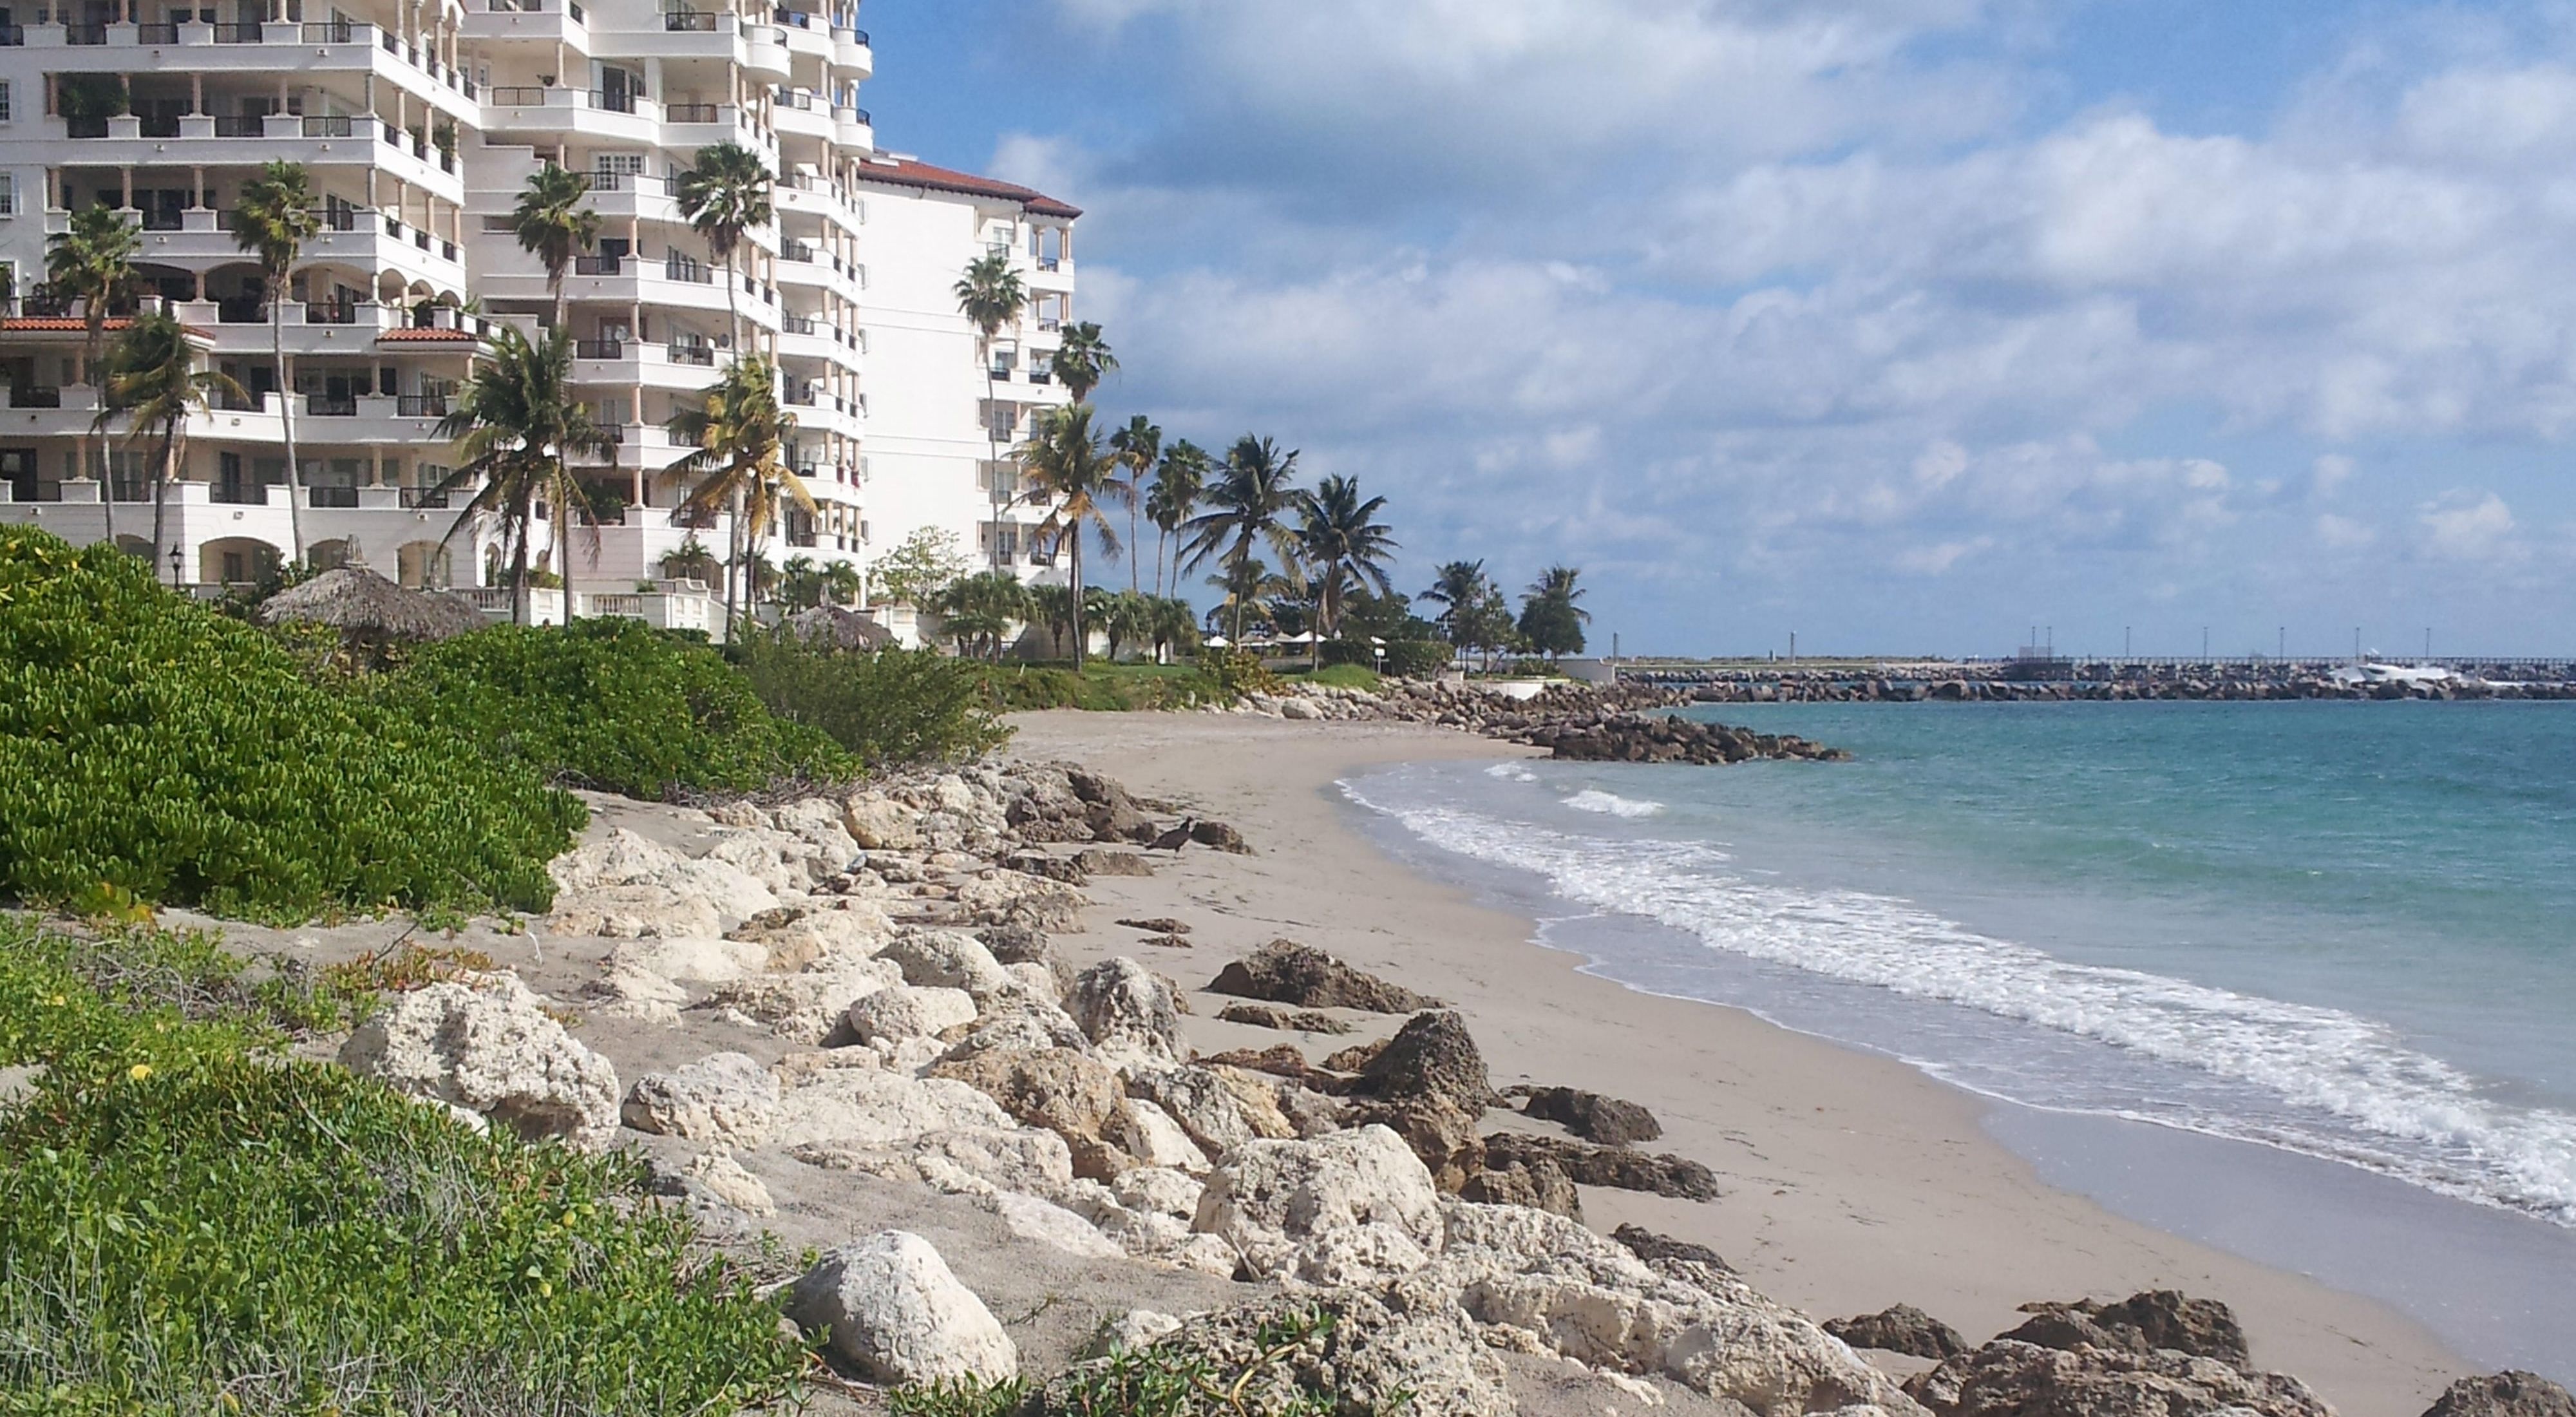 A highrise condominium building sits very near to the ocean shoreline with blue water, rocks and a sandy beach in Fisher Island, located in the Miami, Florida metropolitan area.